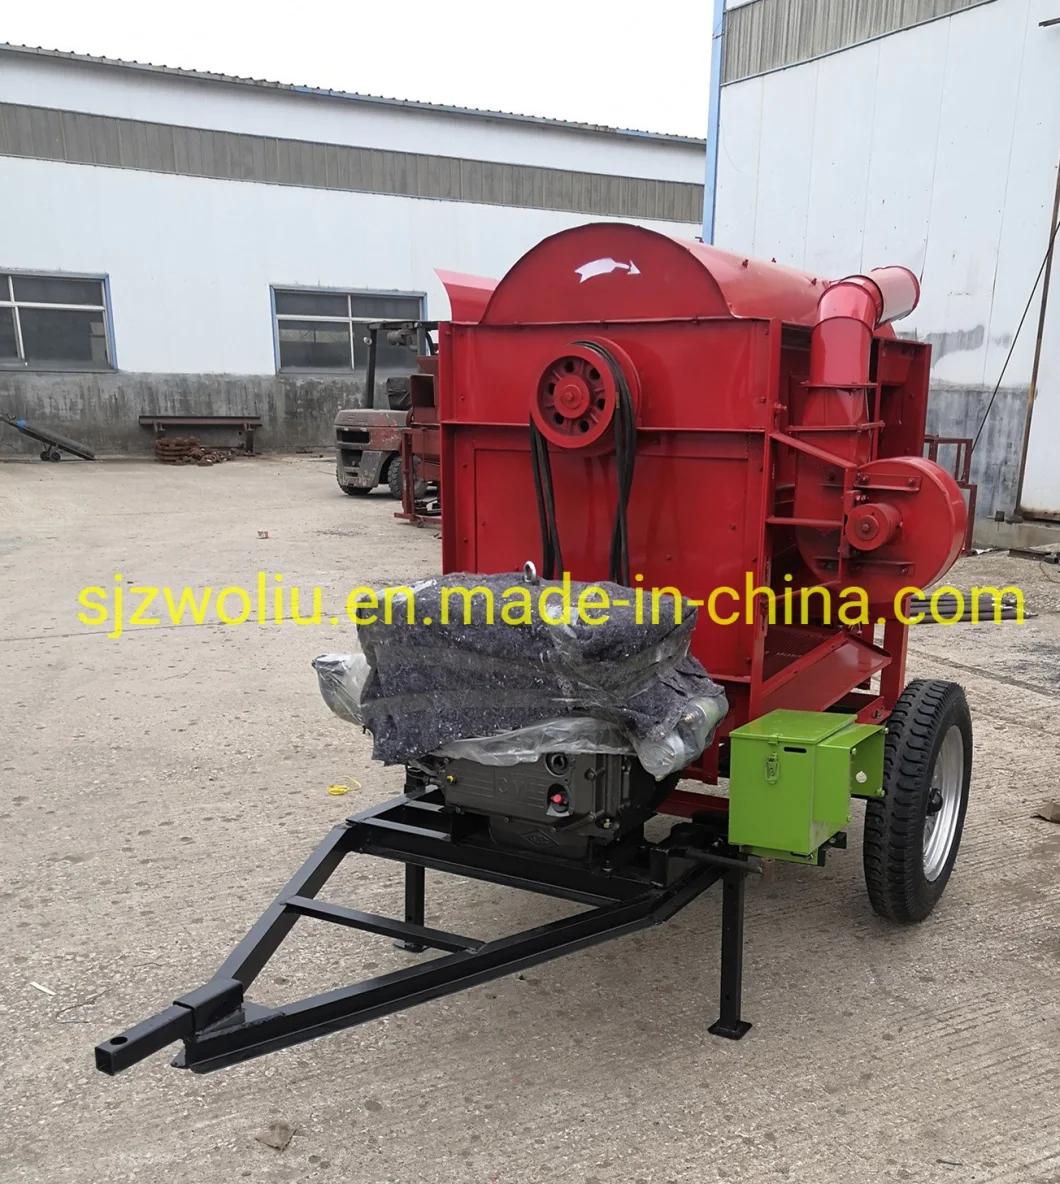 Hot Sale Large Productivity Diesel Engine Type Rice & Wheat Threshing Machine with 2 Wheels, Agricultural Machine